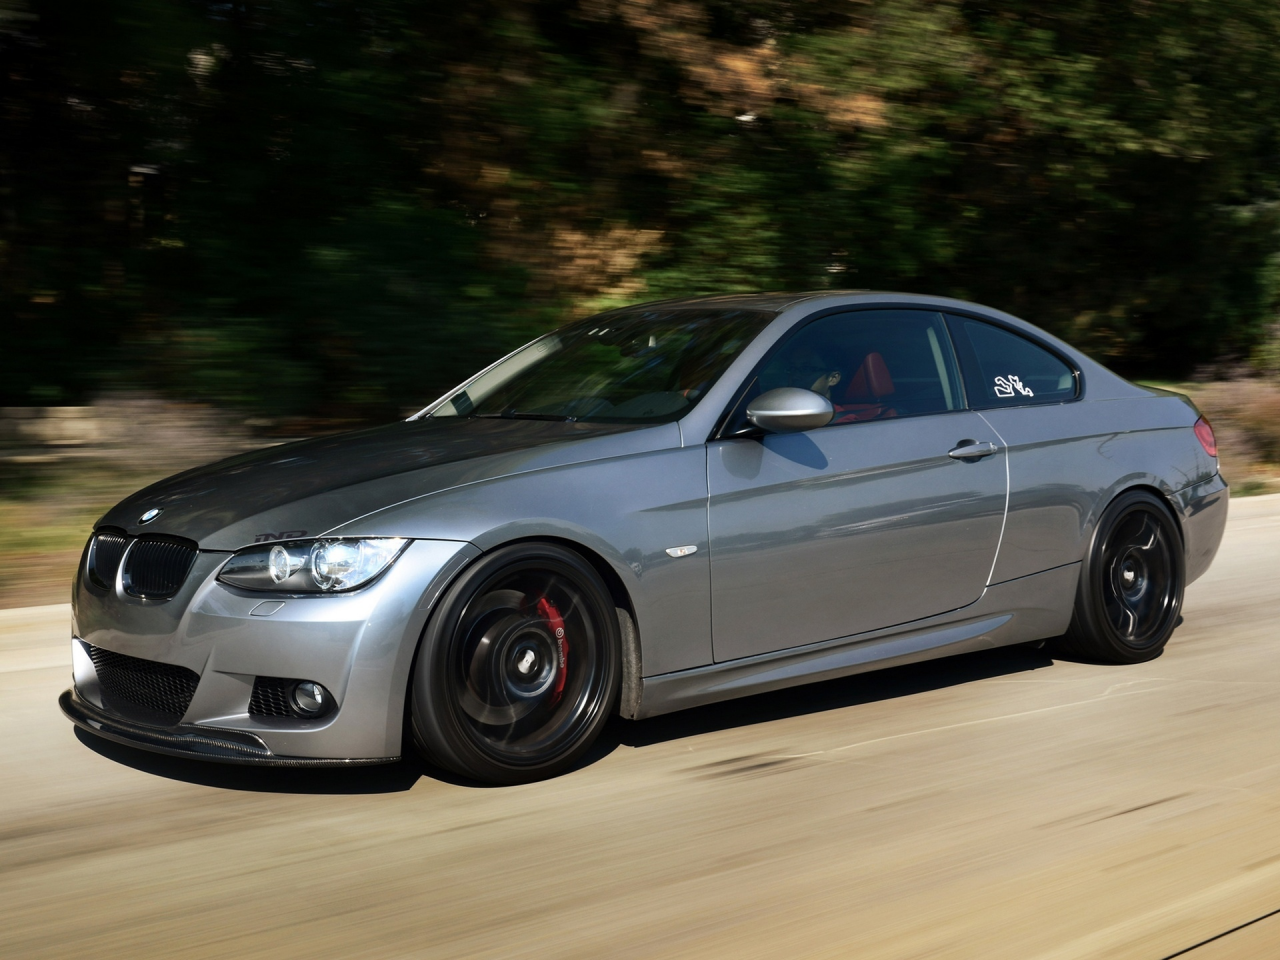 coupe, e92, ind, car, wallpapers, beautiful, bmw, speed, tuning, 2012, automobile, m3, desktop